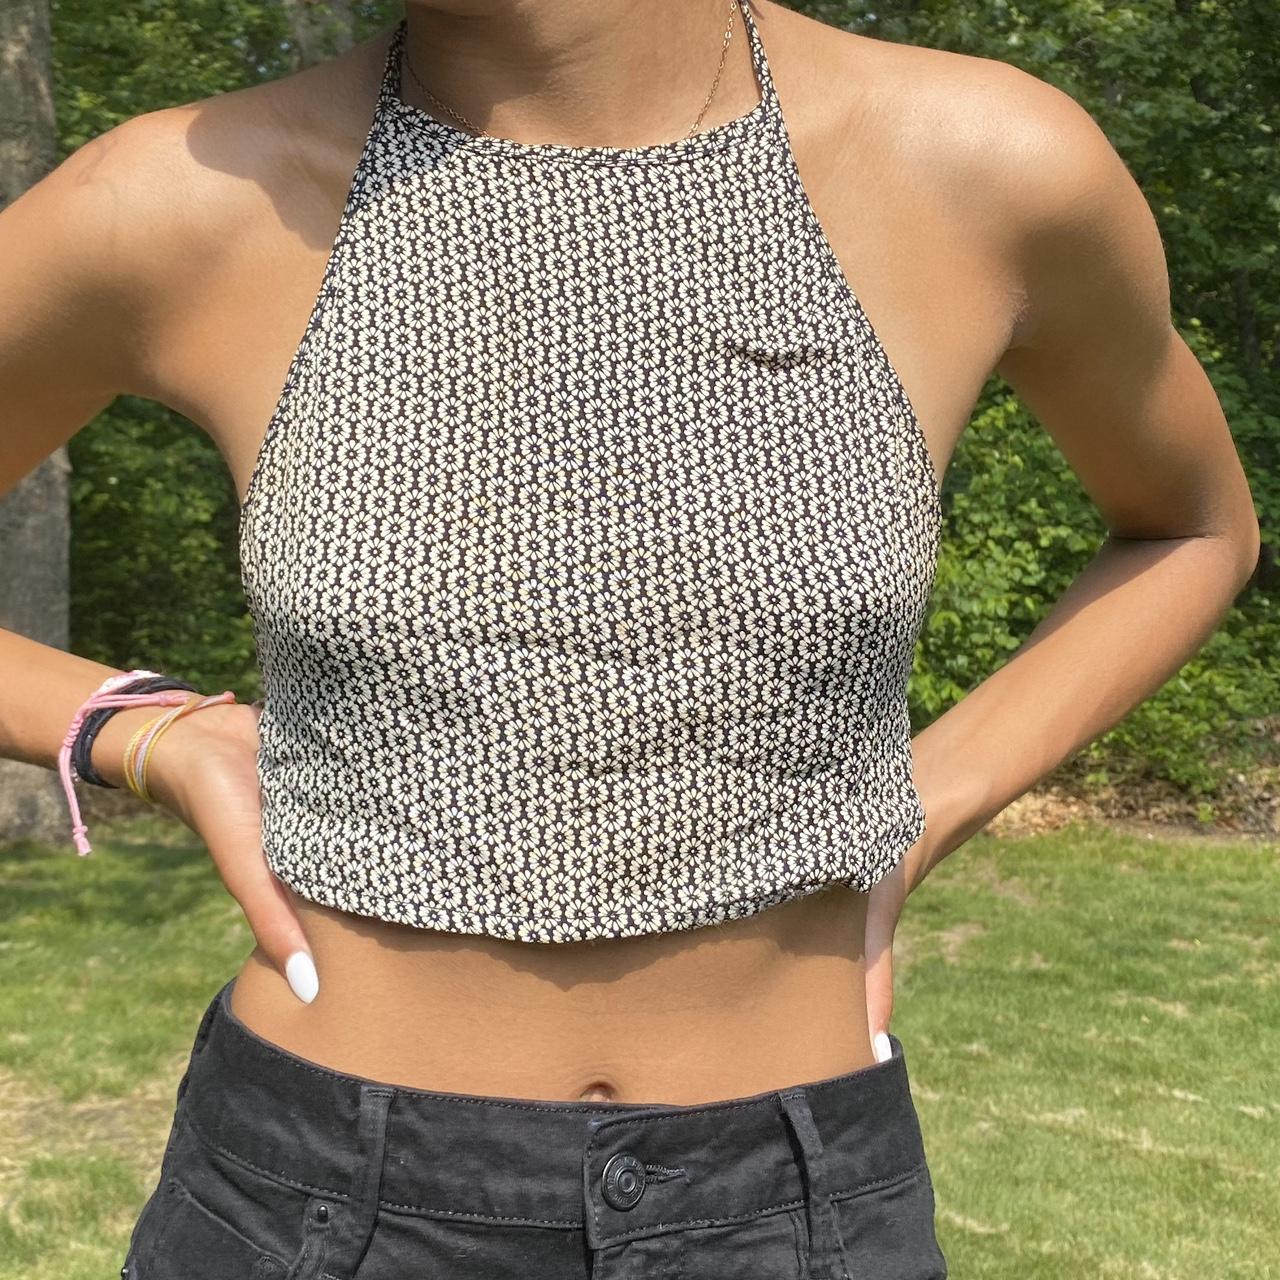 Dainty string halter top from brandy melville. cute